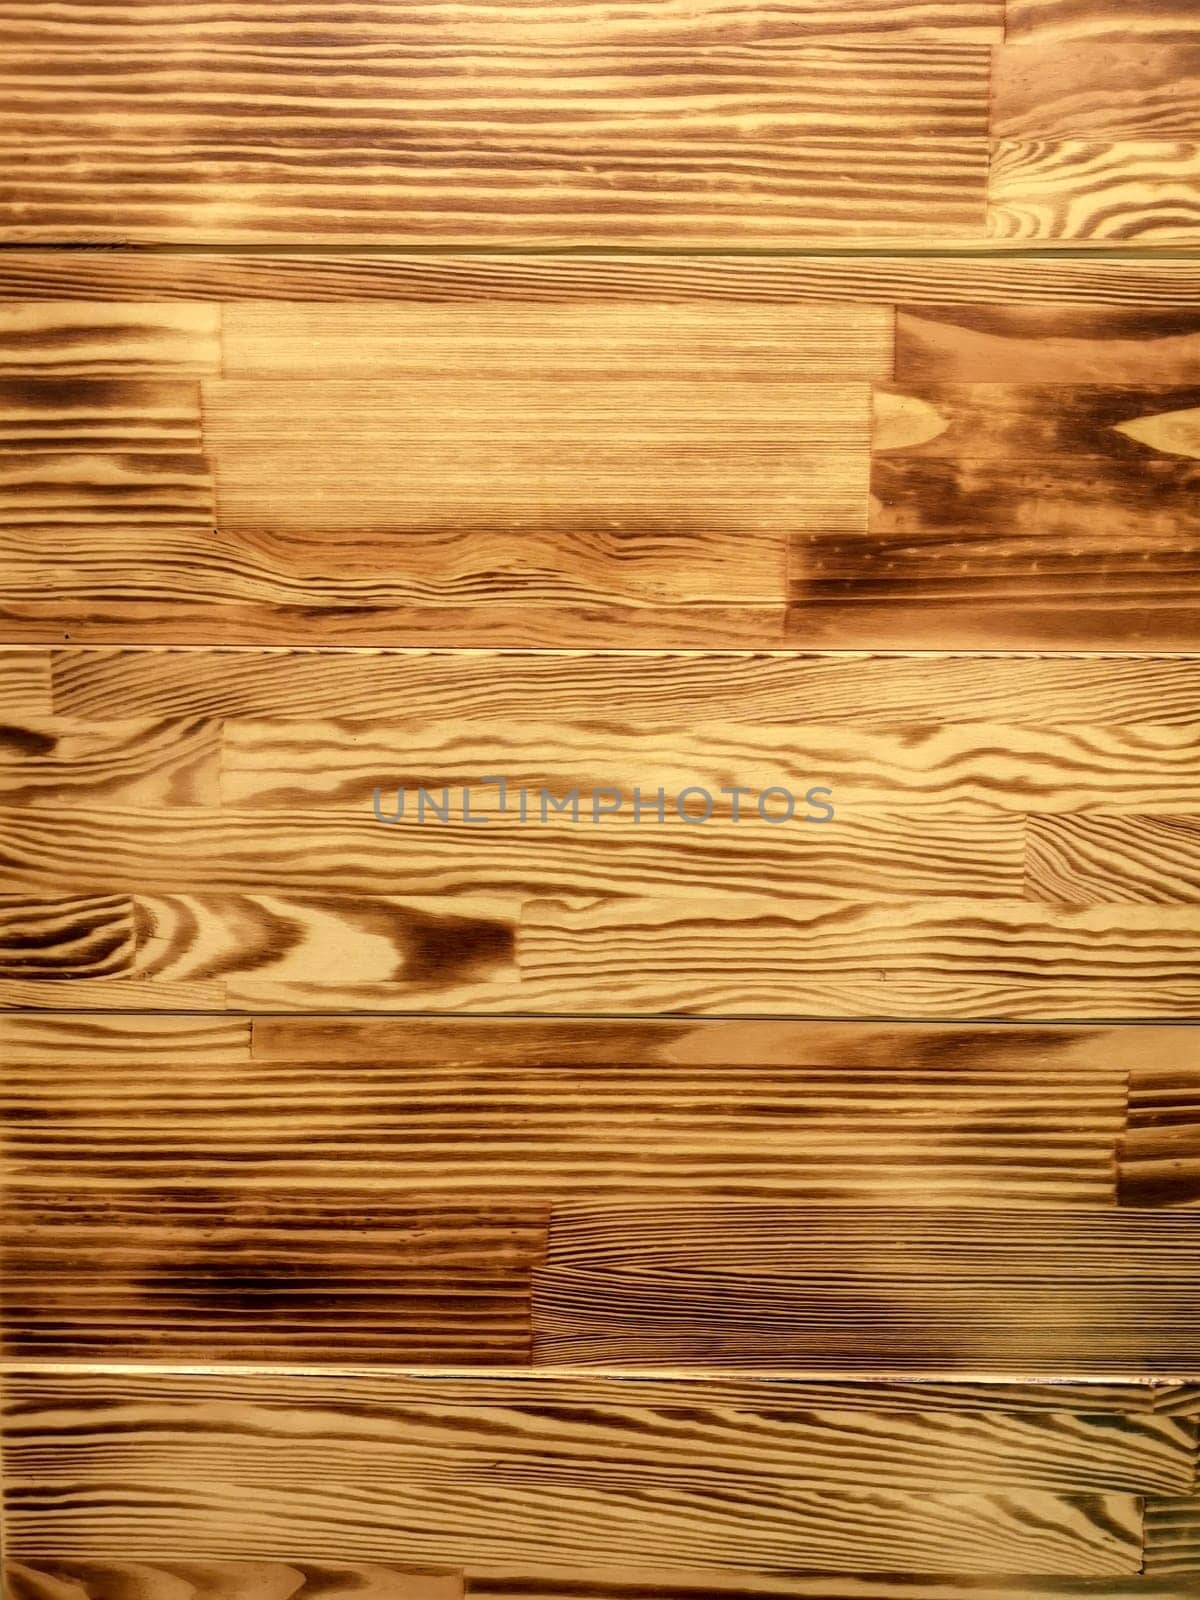 Natural wooden textured background. Old fence. Background for ceramic tiles design. High quality photo